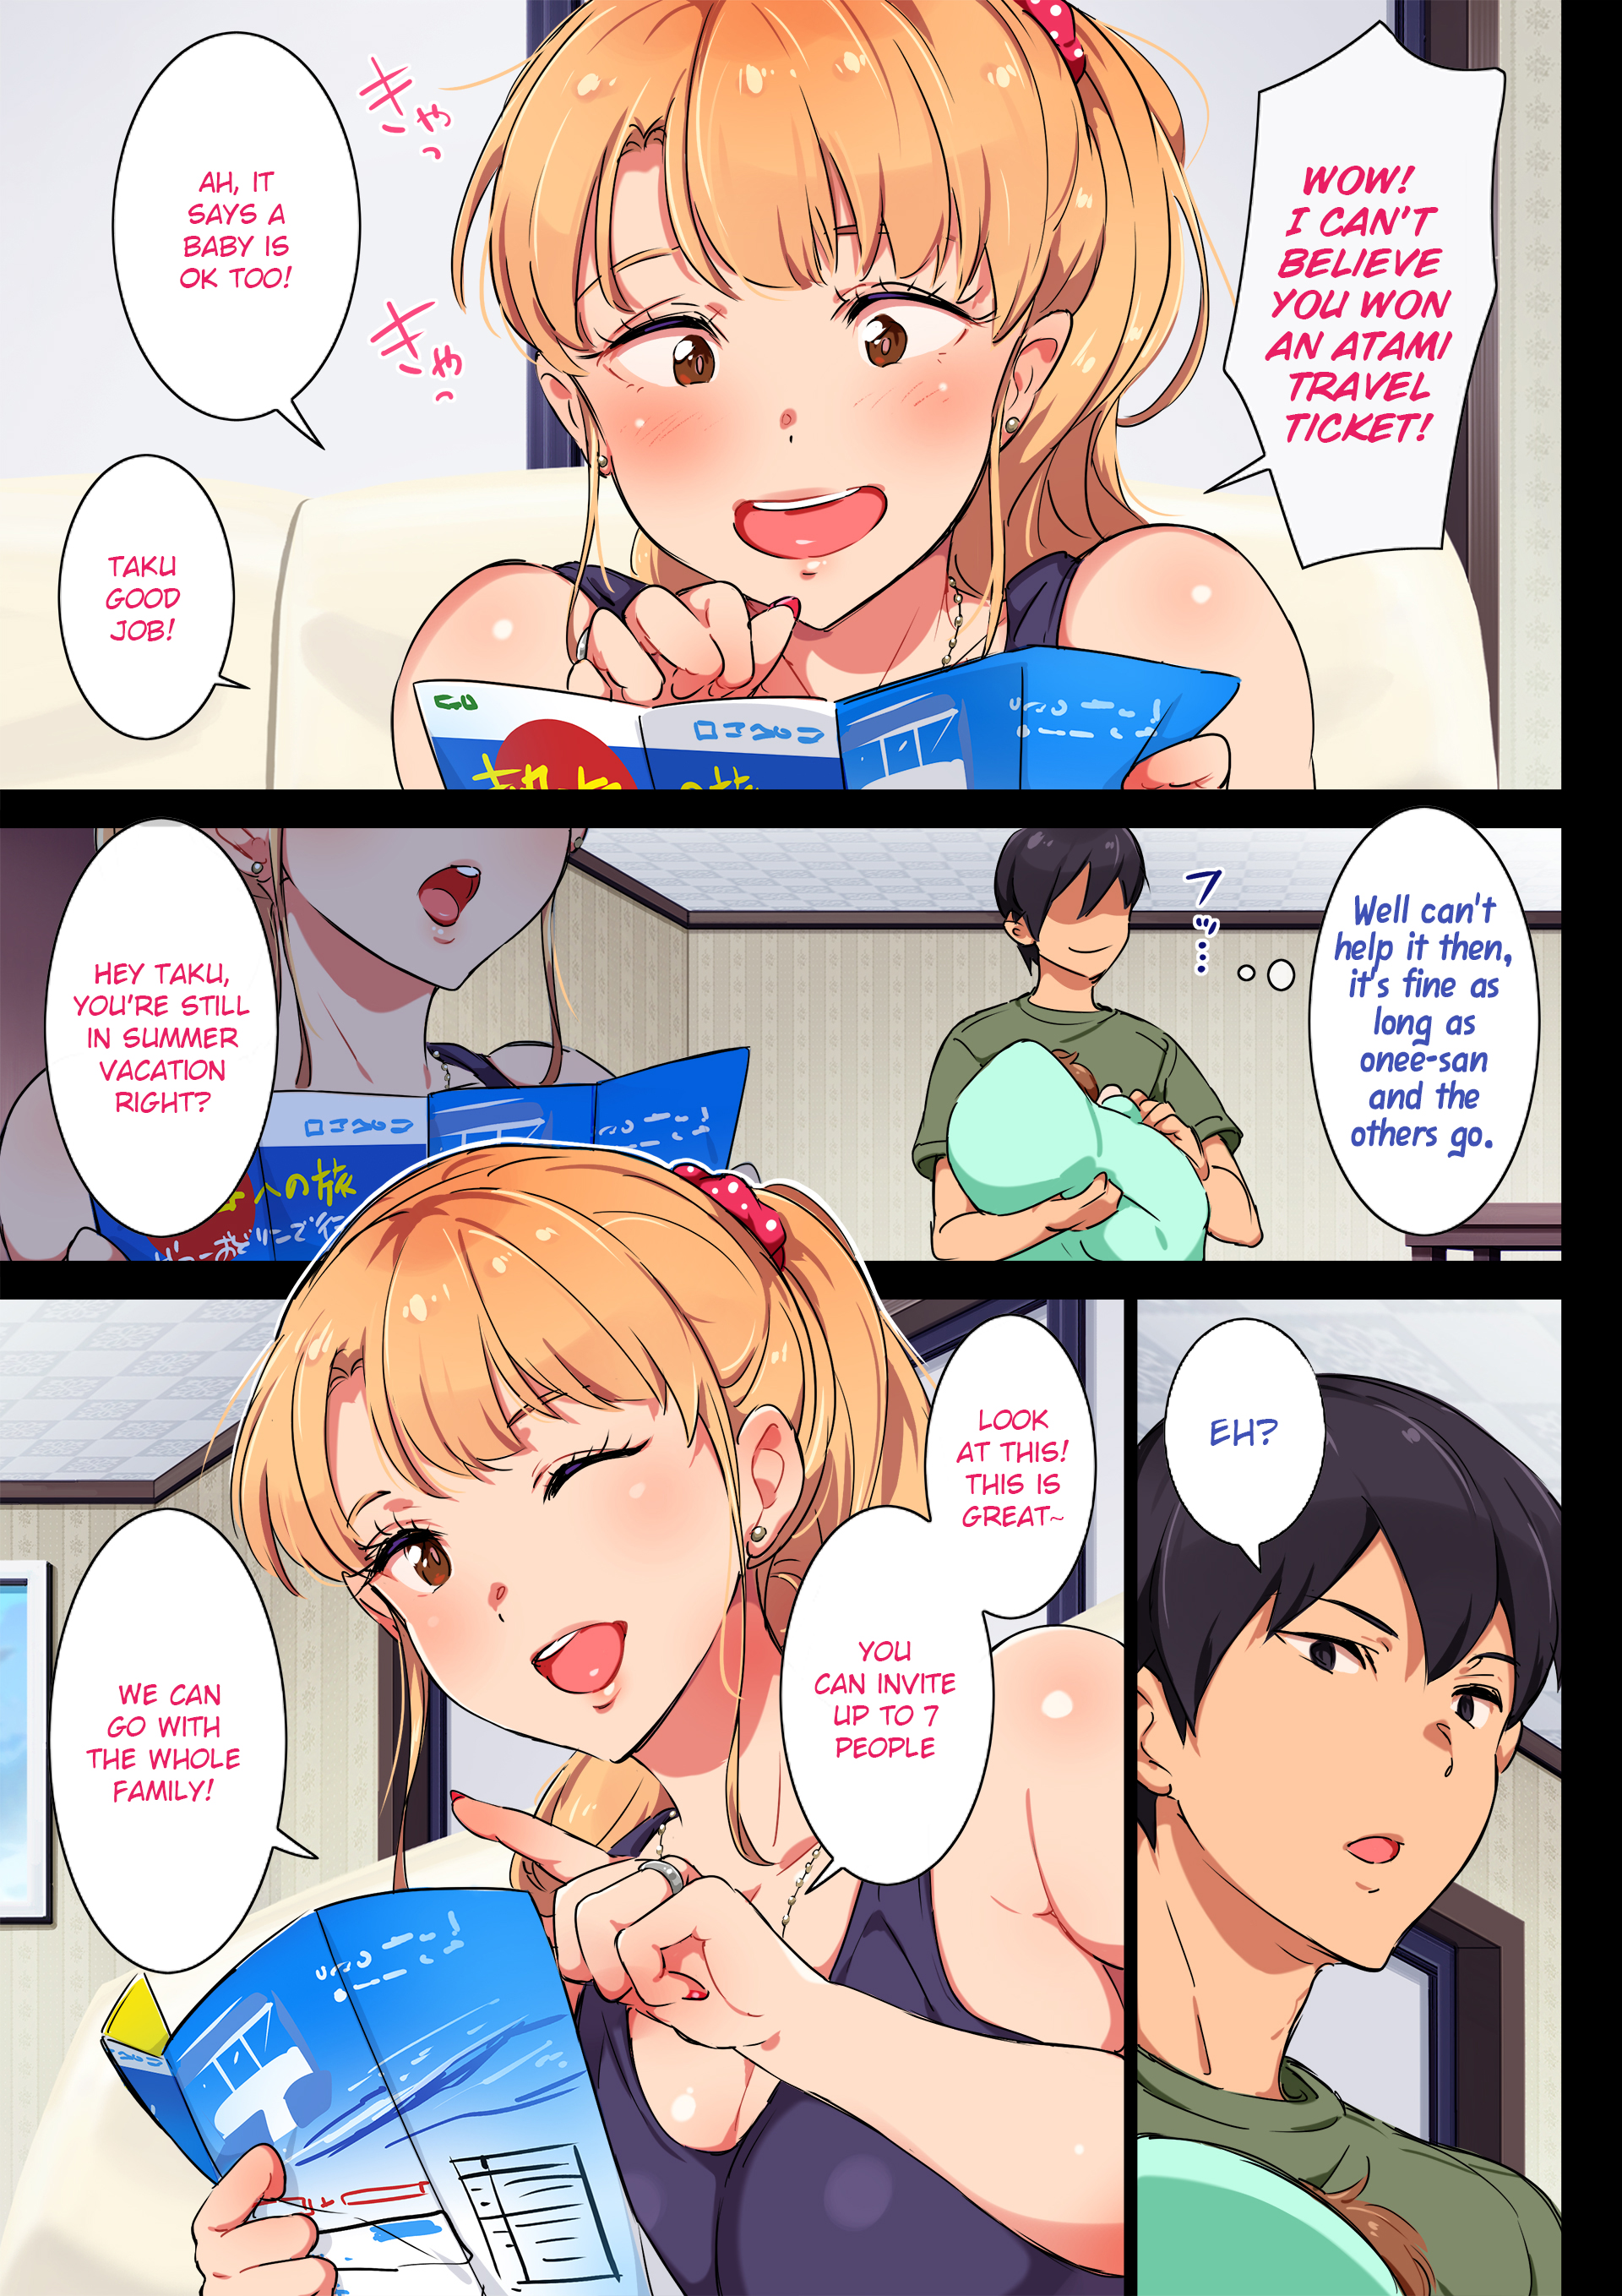 Pervy busty sister fucks her younger brother in the ocean - taboo comics -  47 Pics | Hentai City